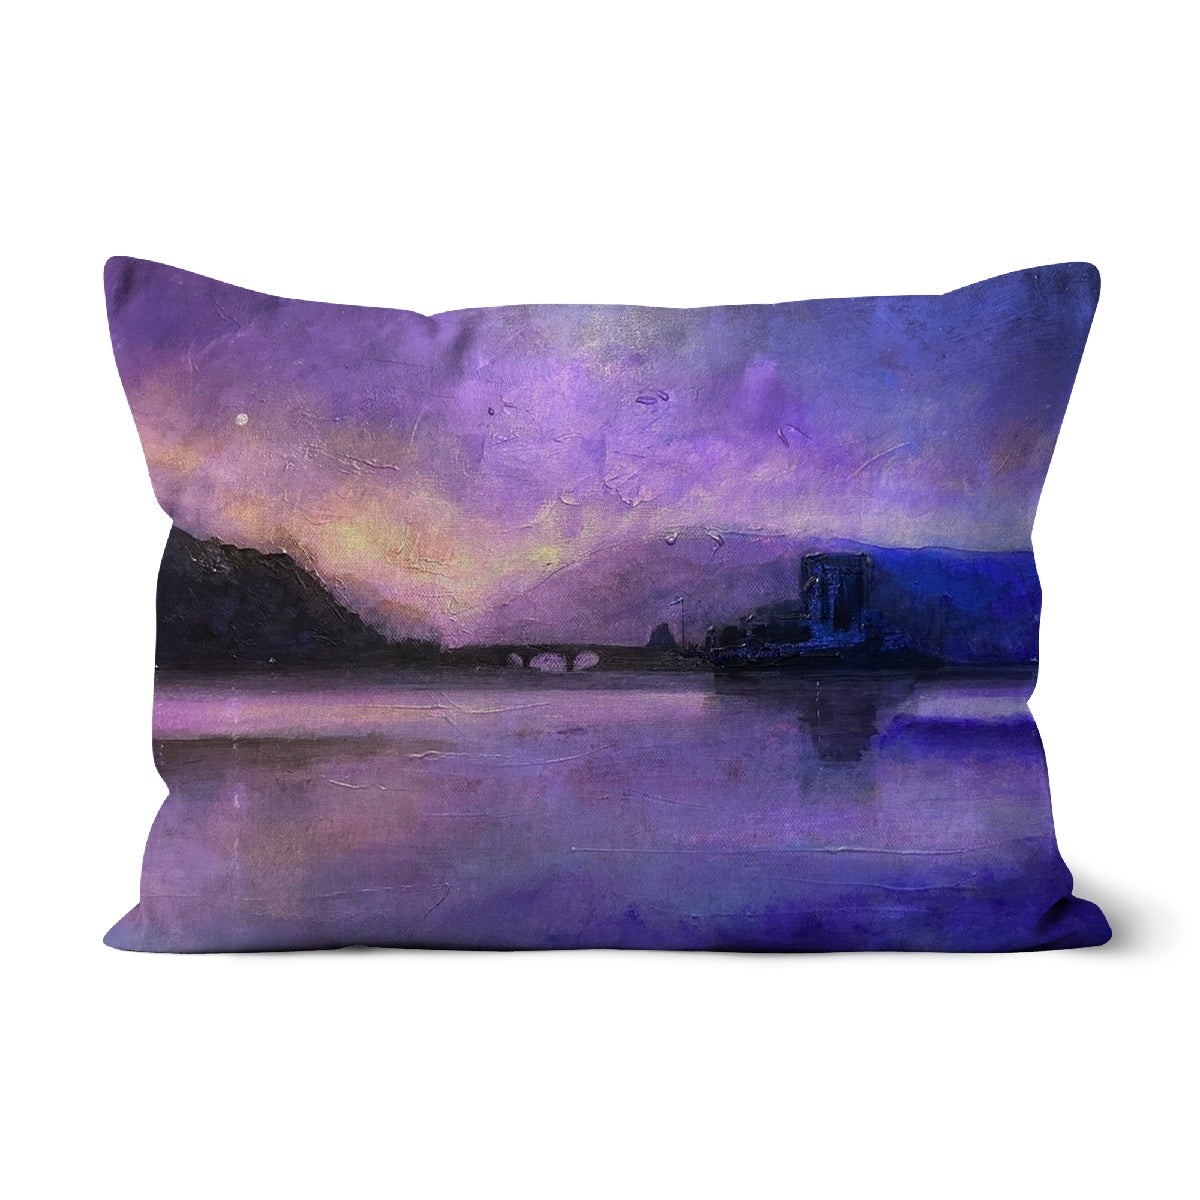 Eilean Donan Castle Moonset Art Gifts Cushion-Cushions-Historic & Iconic Scotland Art Gallery-Canvas-19"x13"-Paintings, Prints, Homeware, Art Gifts From Scotland By Scottish Artist Kevin Hunter